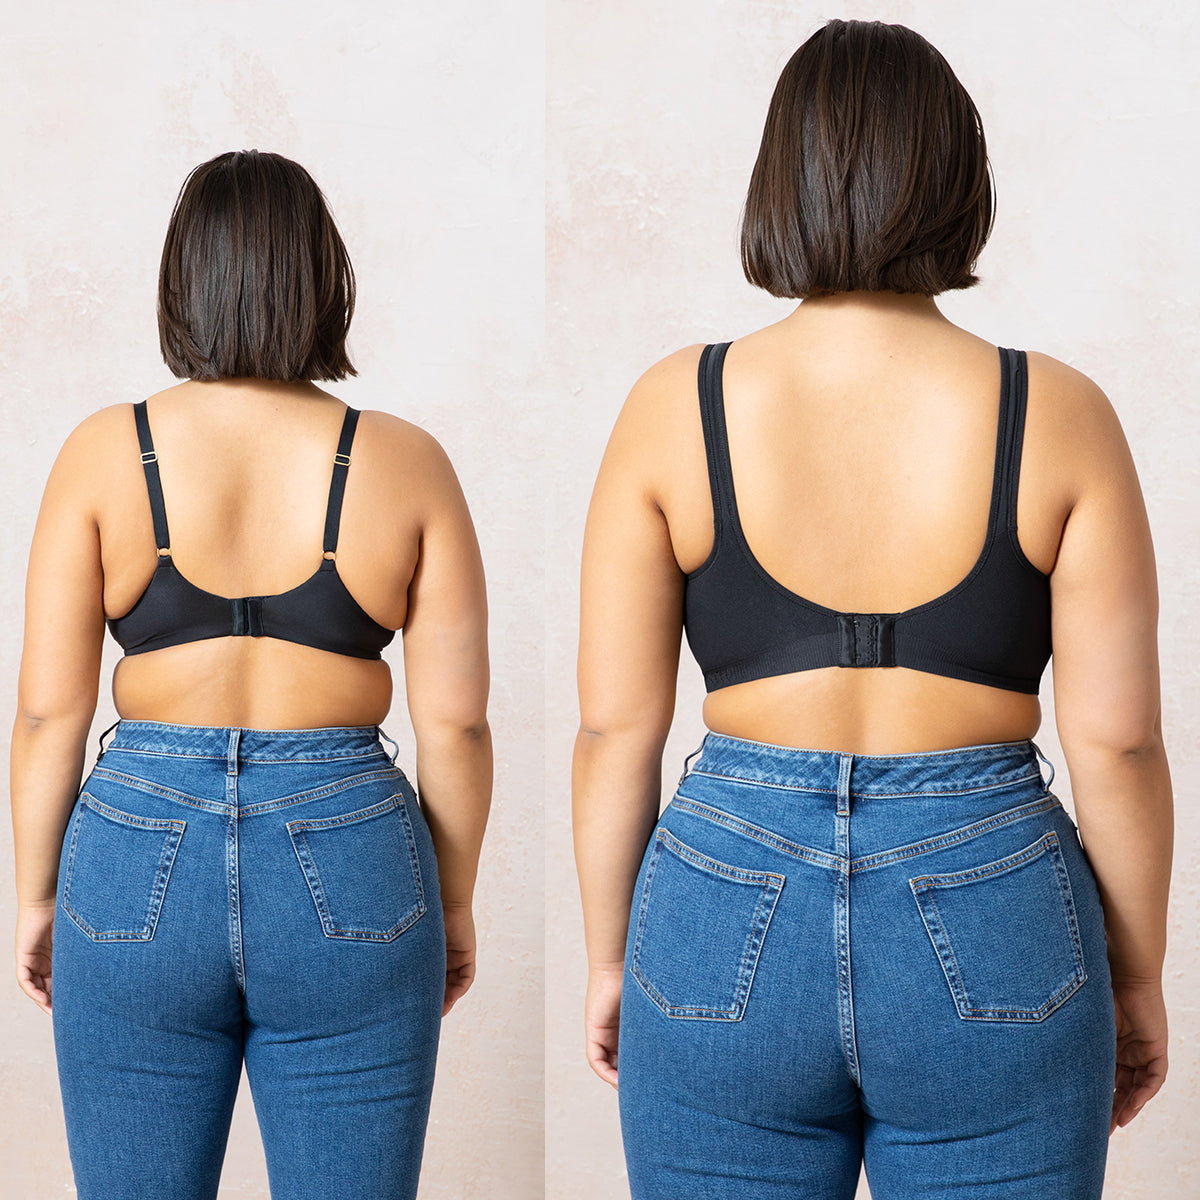 Shapermint Shaper Bra Before and After